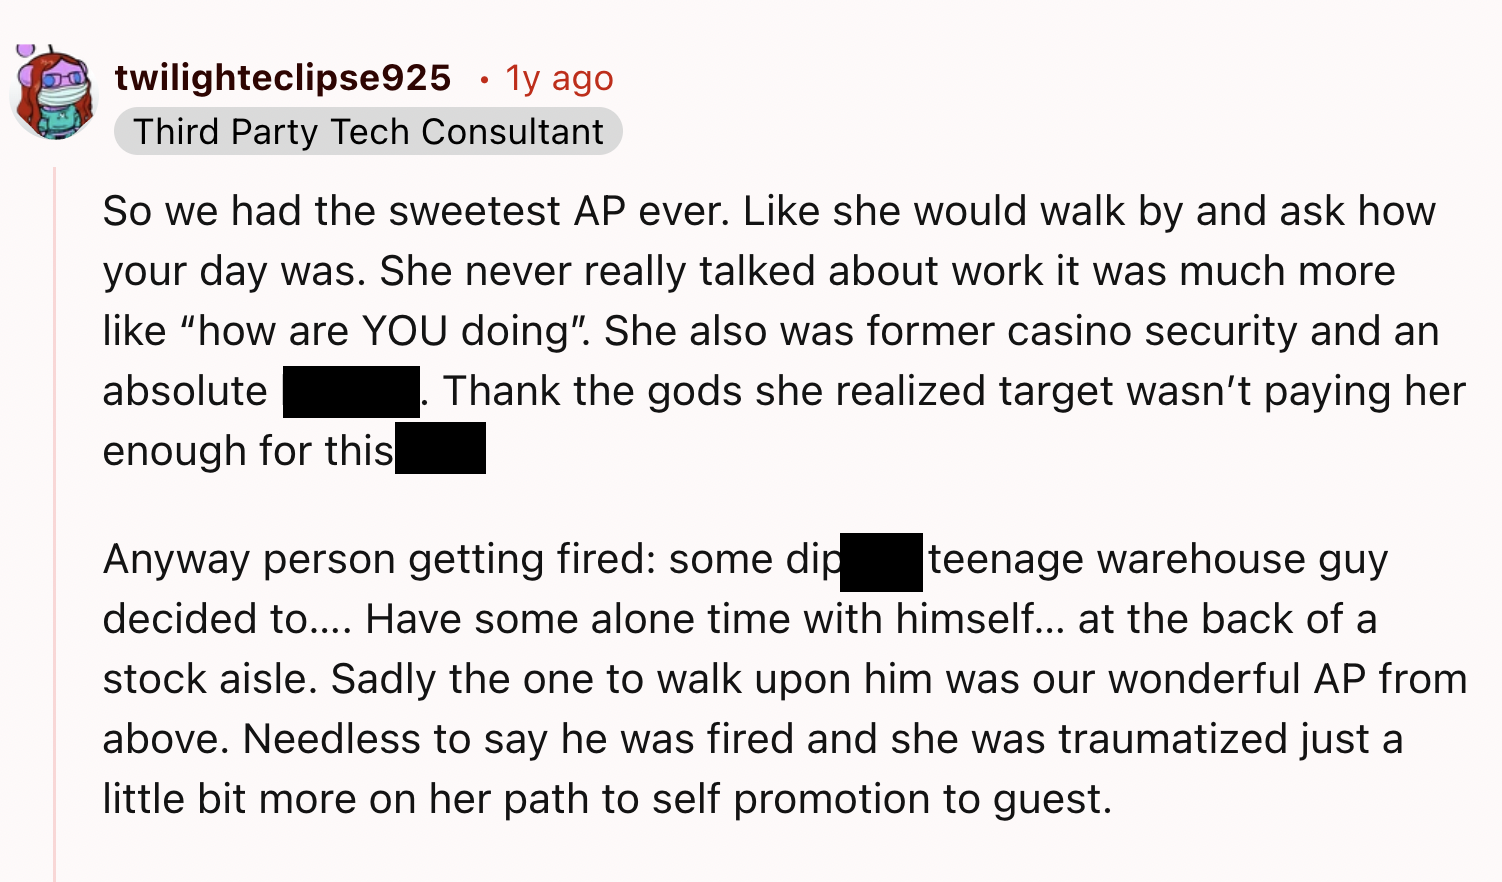 screenshot - twilighteclipse925 . 1y ago Third Party Tech Consultant So we had the sweetest Ap ever. she would walk by and ask how your day was. She never really talked about work it was much more "how are You doing". She also was former casino security a